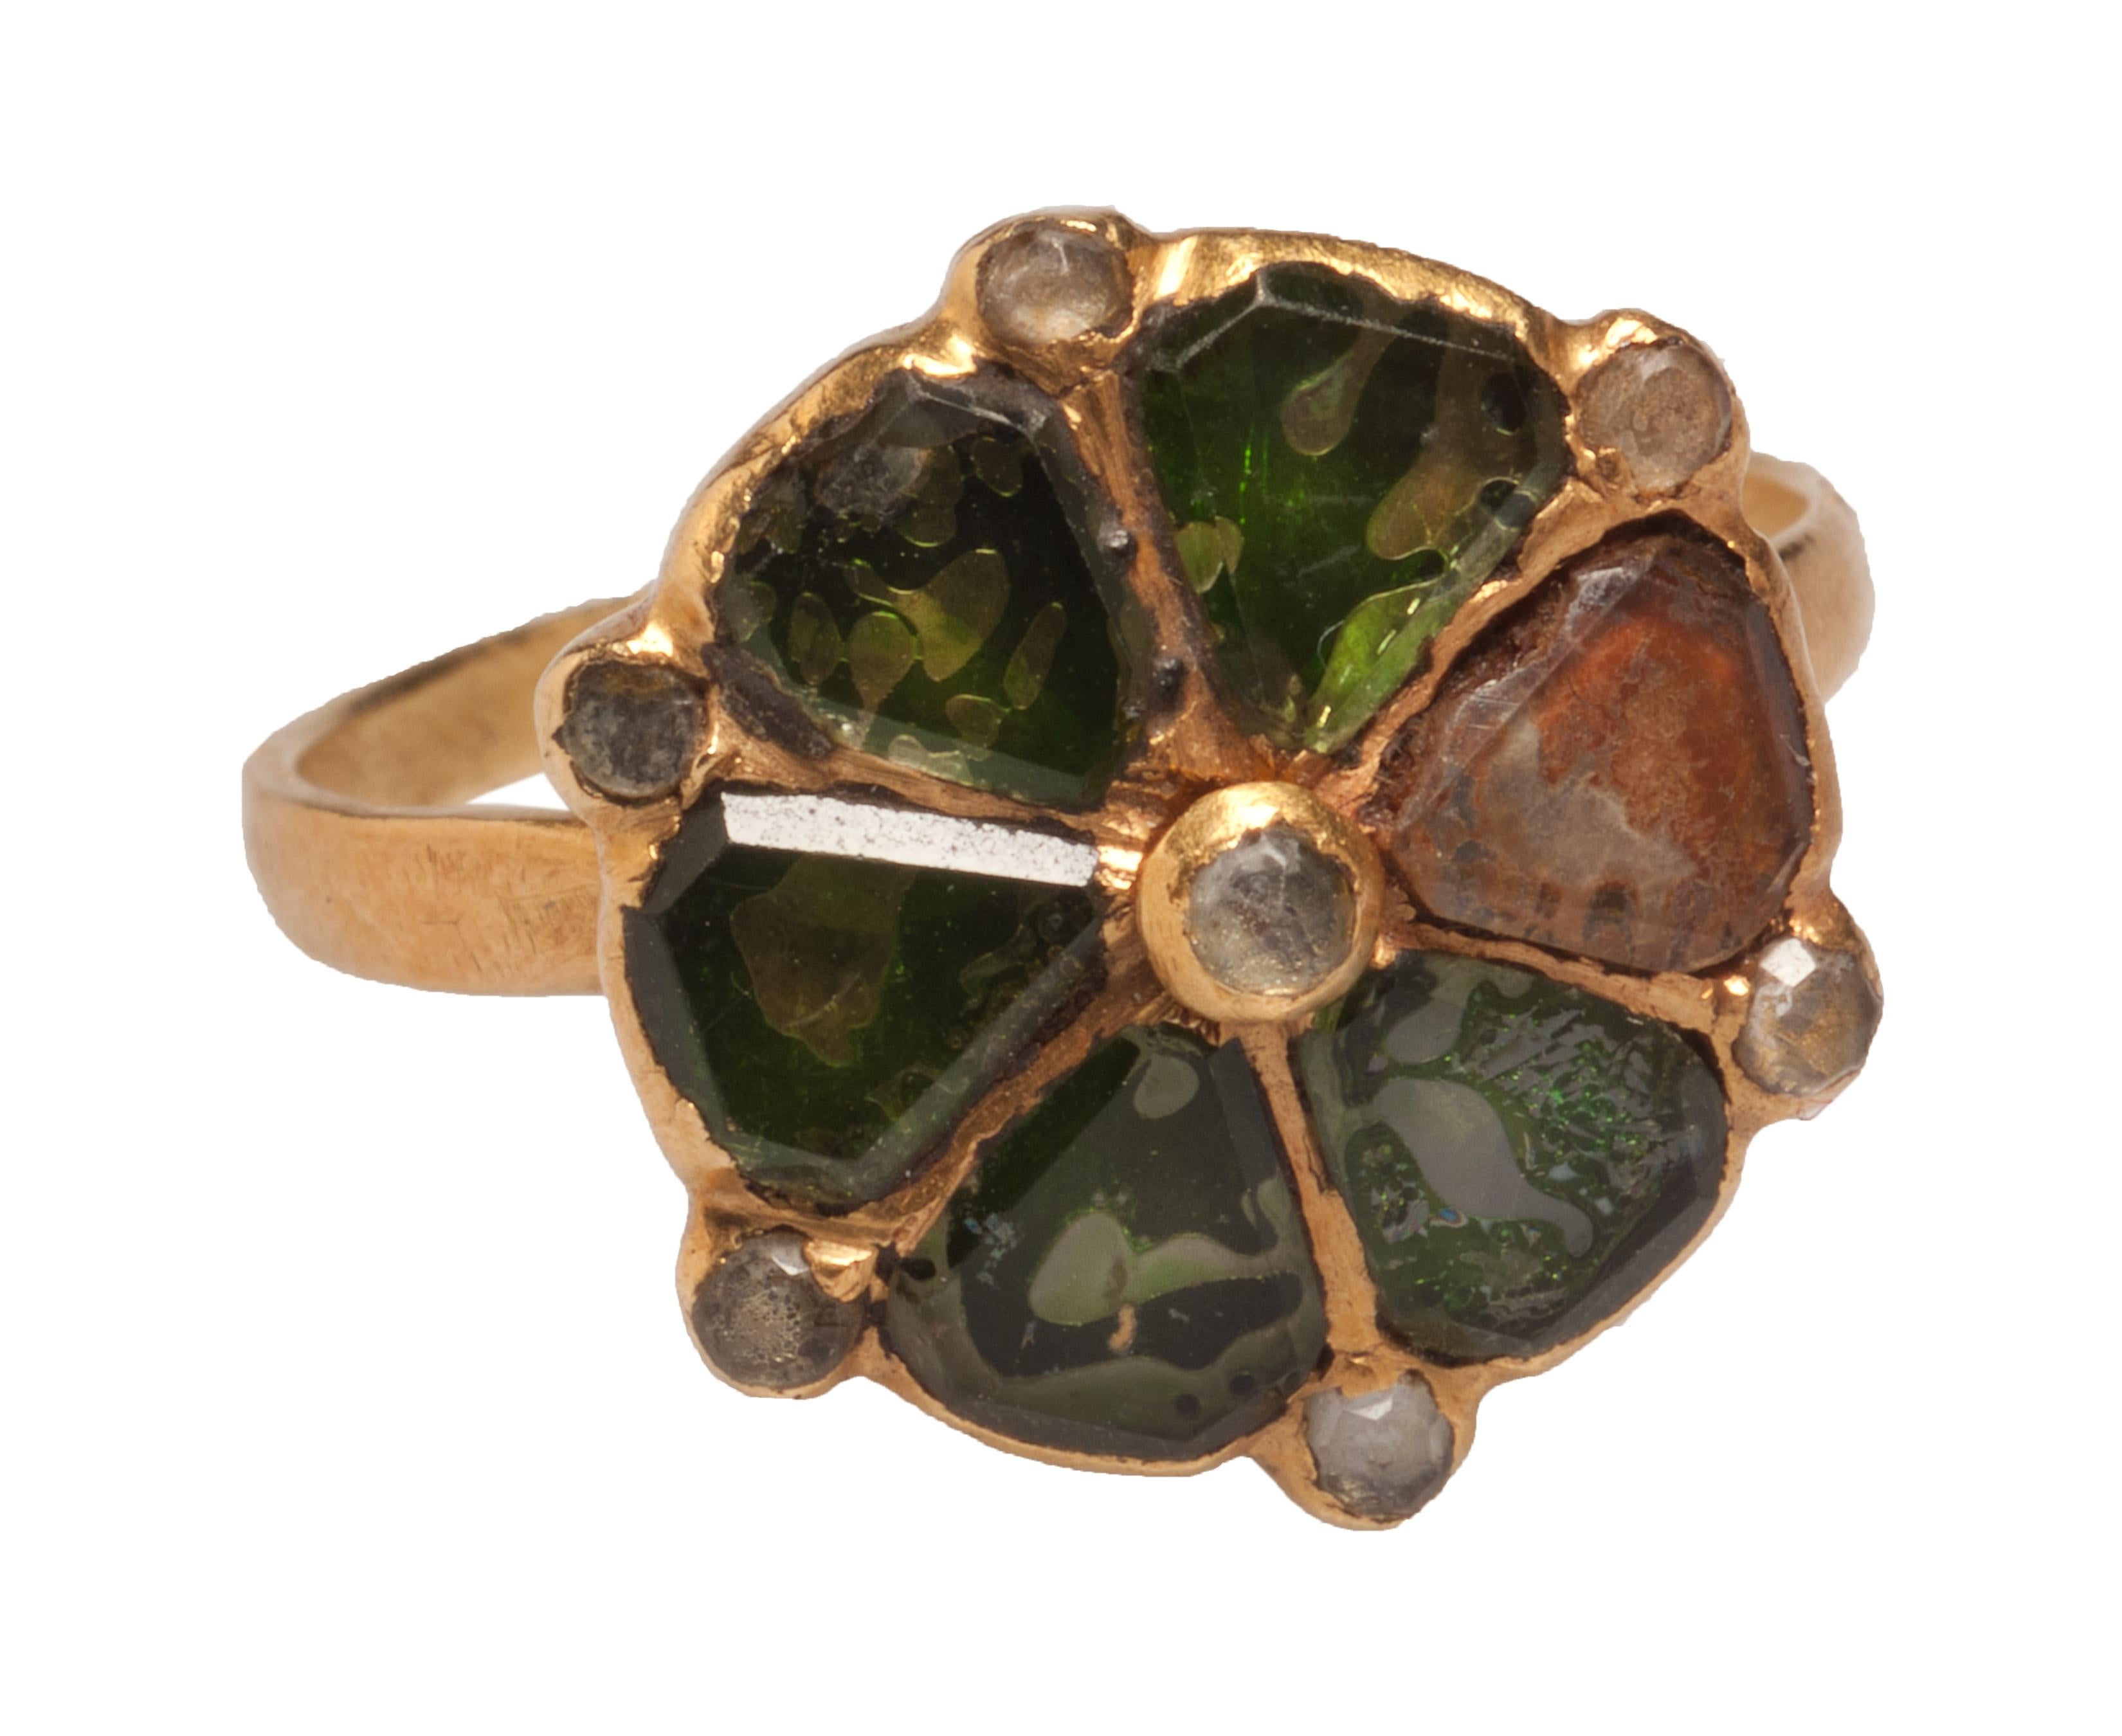 ITALIAN GLASS DECORATIVE RING 
Italy, 17th century  
Gold and foiled glass 
Weight: 4.4 g; circumference 57.6 mm; size: US 8.25, UK Q 

Gold sexfoil bezel set with six diamond-shaped and table cut glass stones over foil. Each petal is interspersed